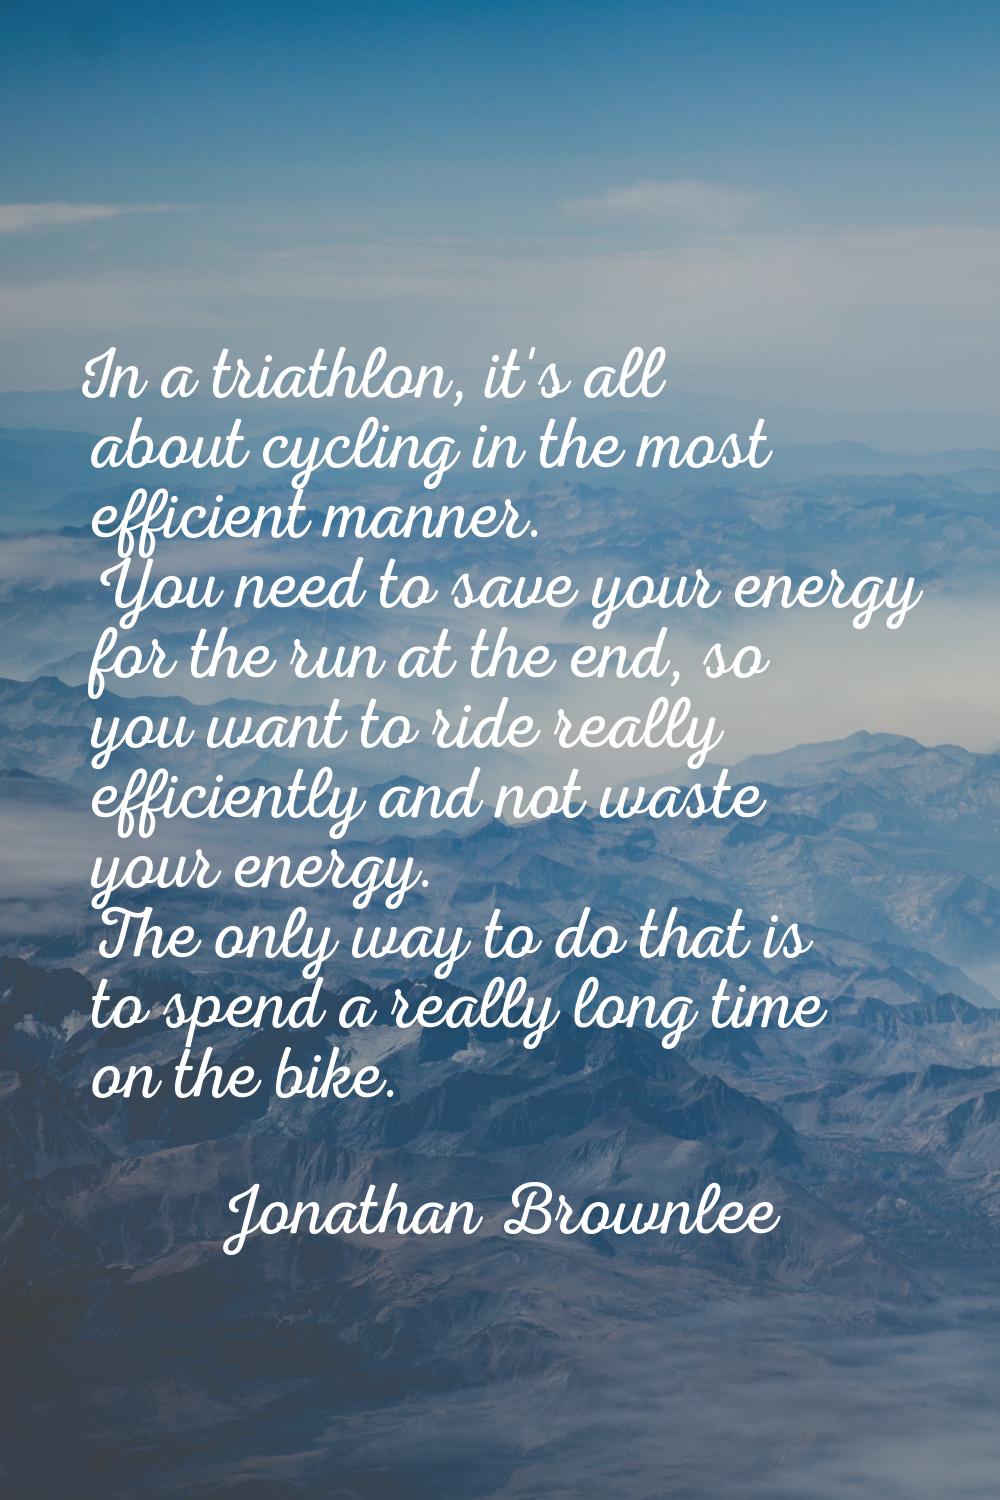 In a triathlon, it's all about cycling in the most efficient manner. You need to save your energy f